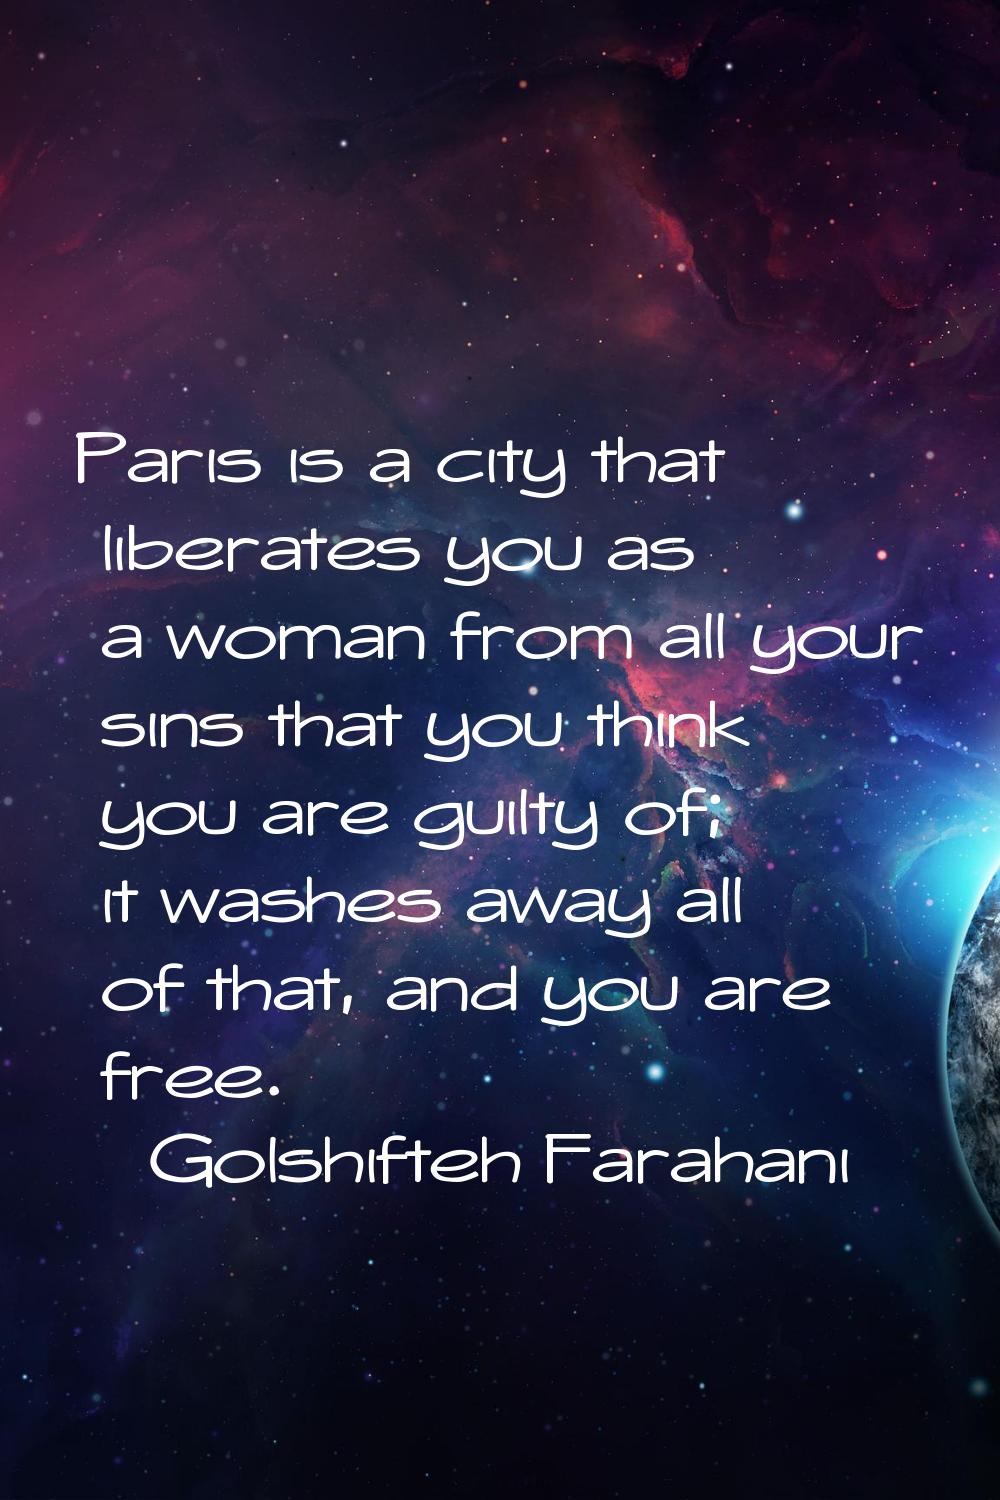 Paris is a city that liberates you as a woman from all your sins that you think you are guilty of; 